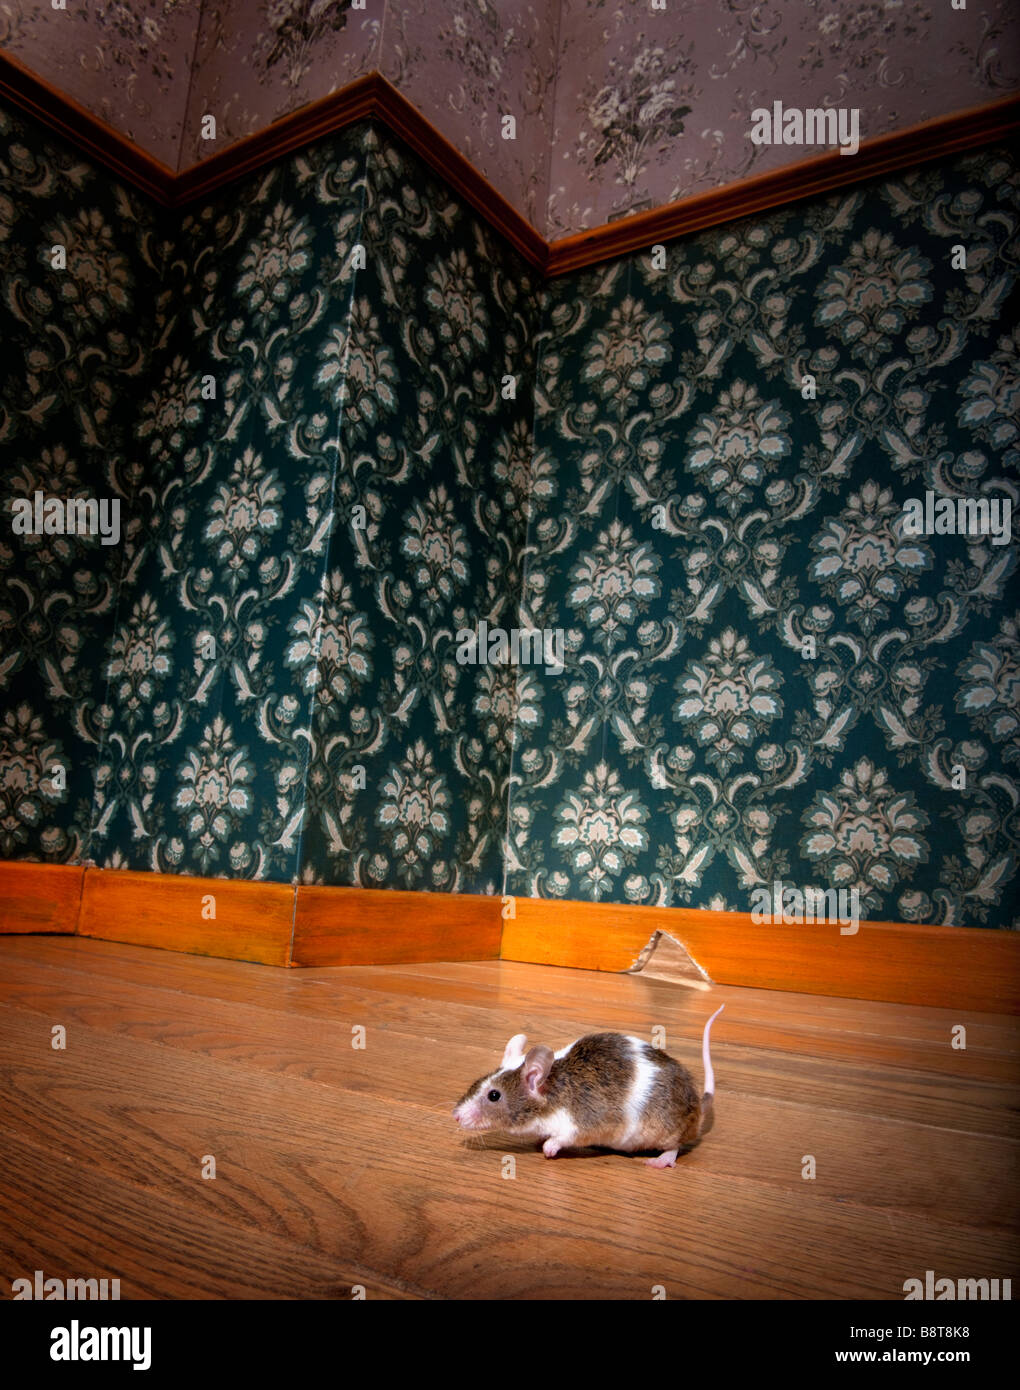 mouse walking in a luxury old fashioned room We can see her hole in the background Stock Photo